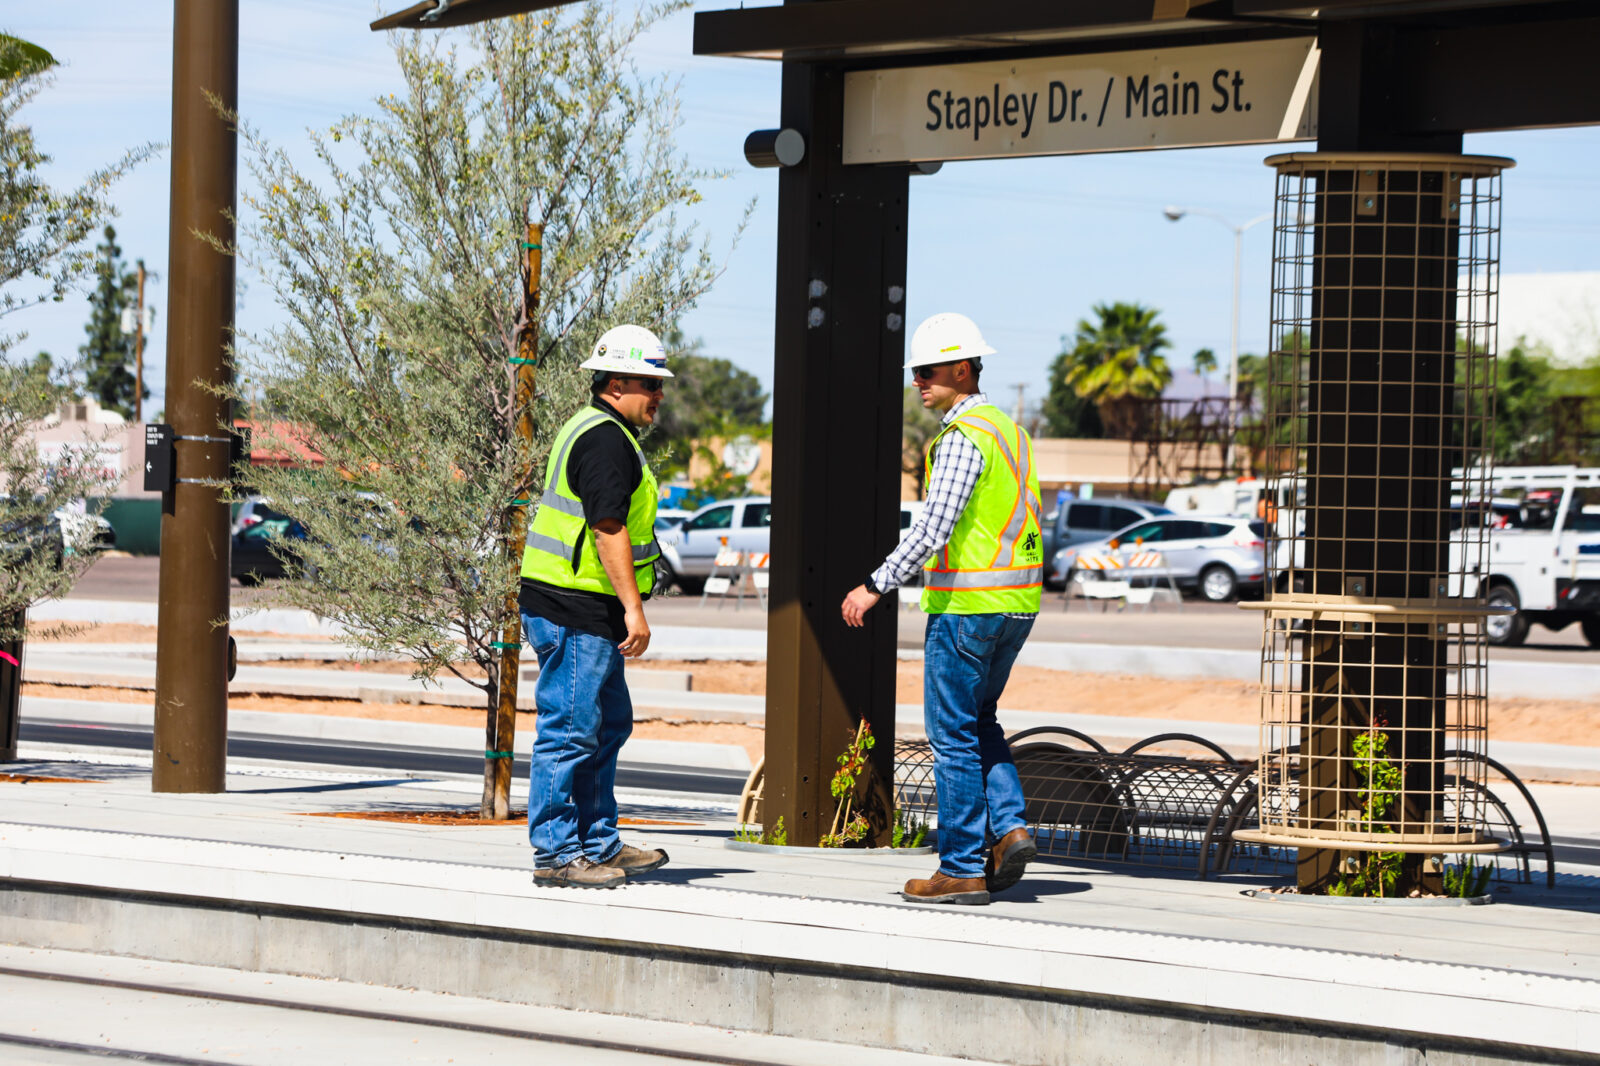 Two construction workers at the Stapley Dr. railway station